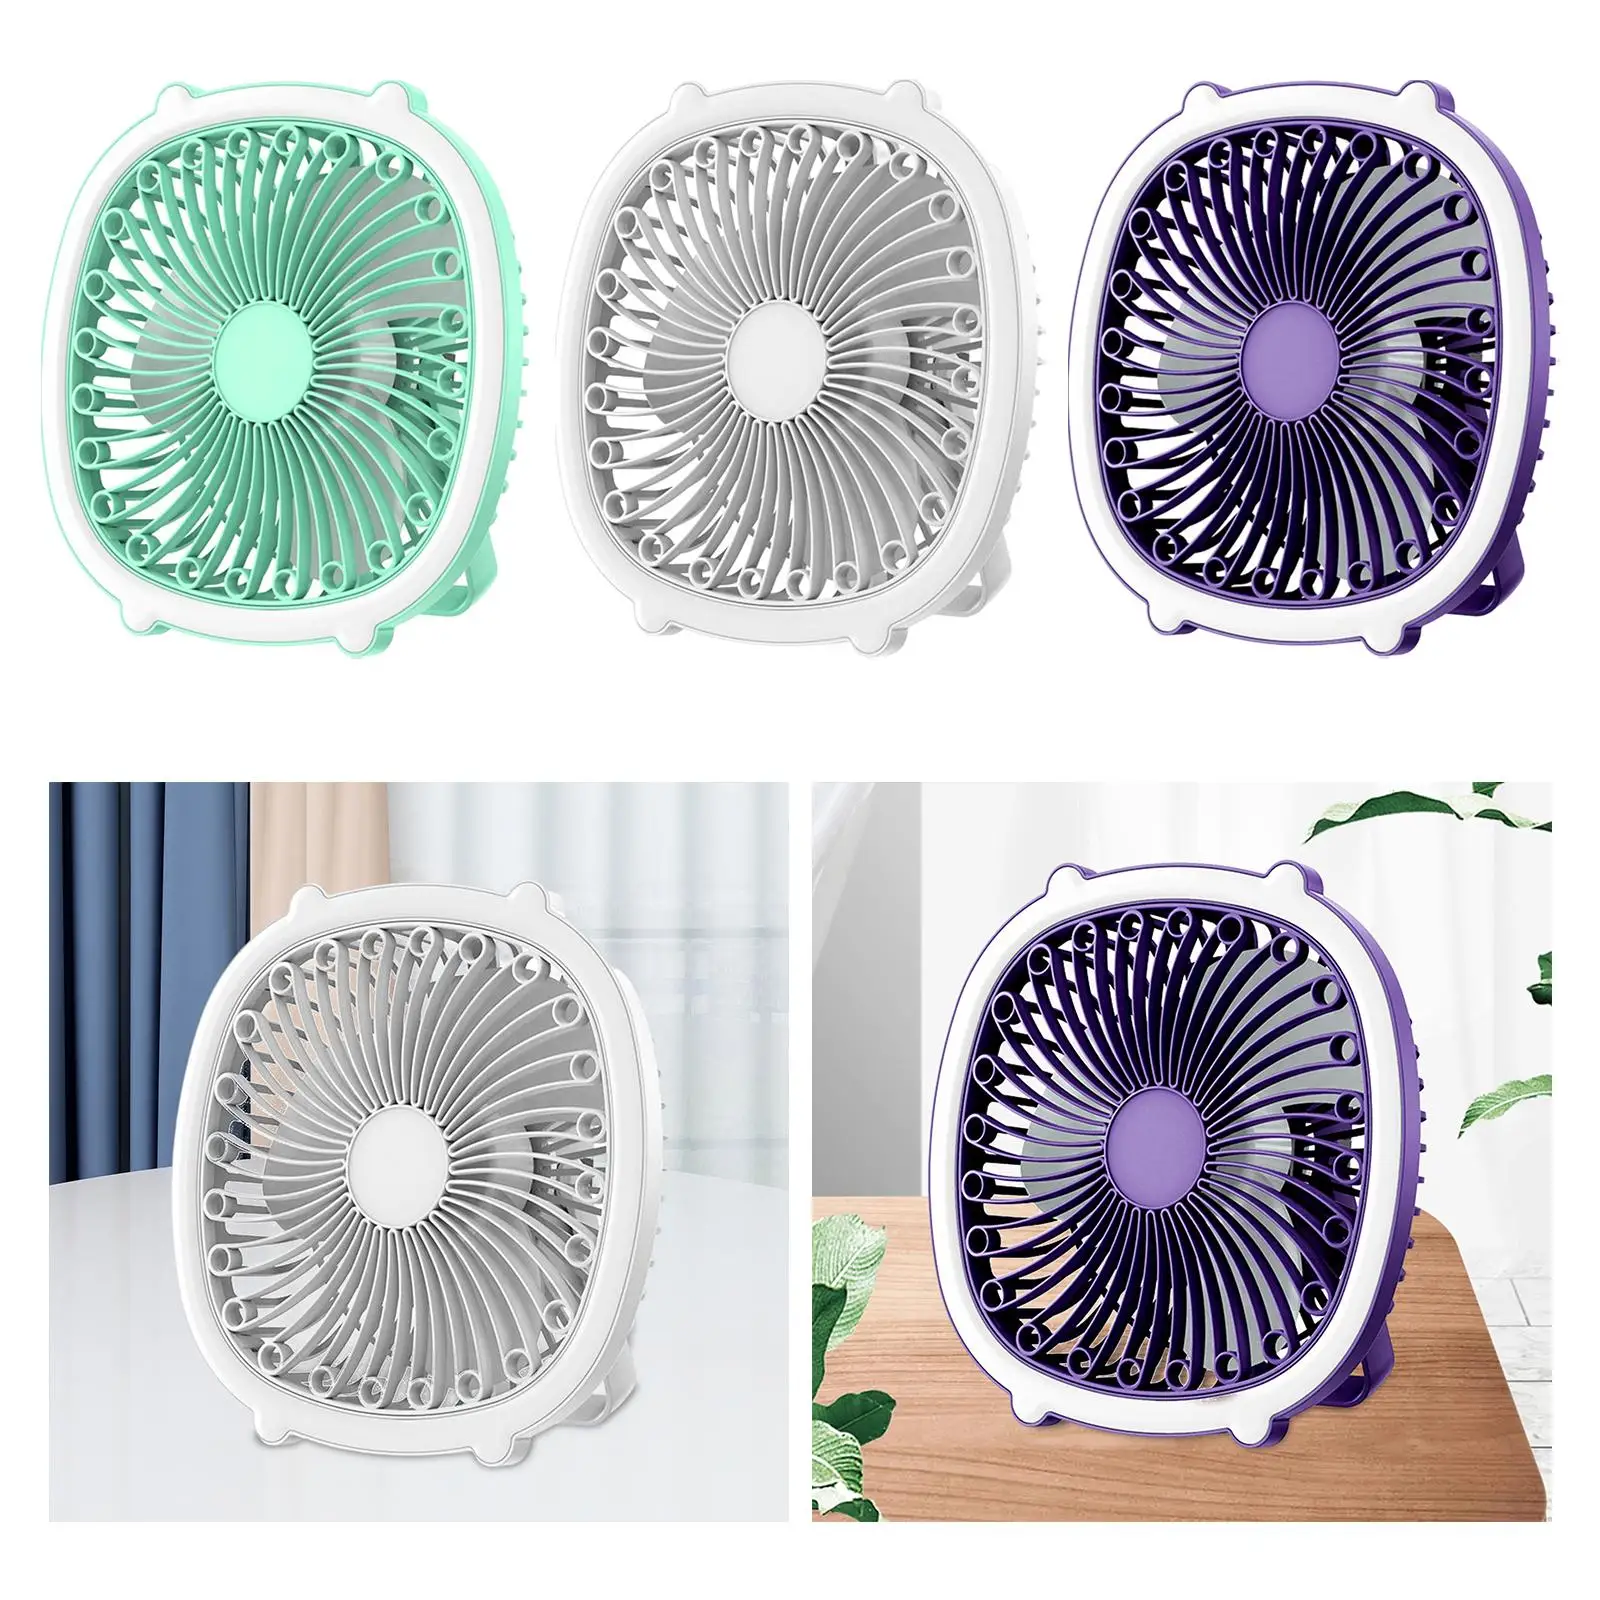 Personal Table Cooling Fan Quiet Operation Desk Fans for Outdoor Indoor Home